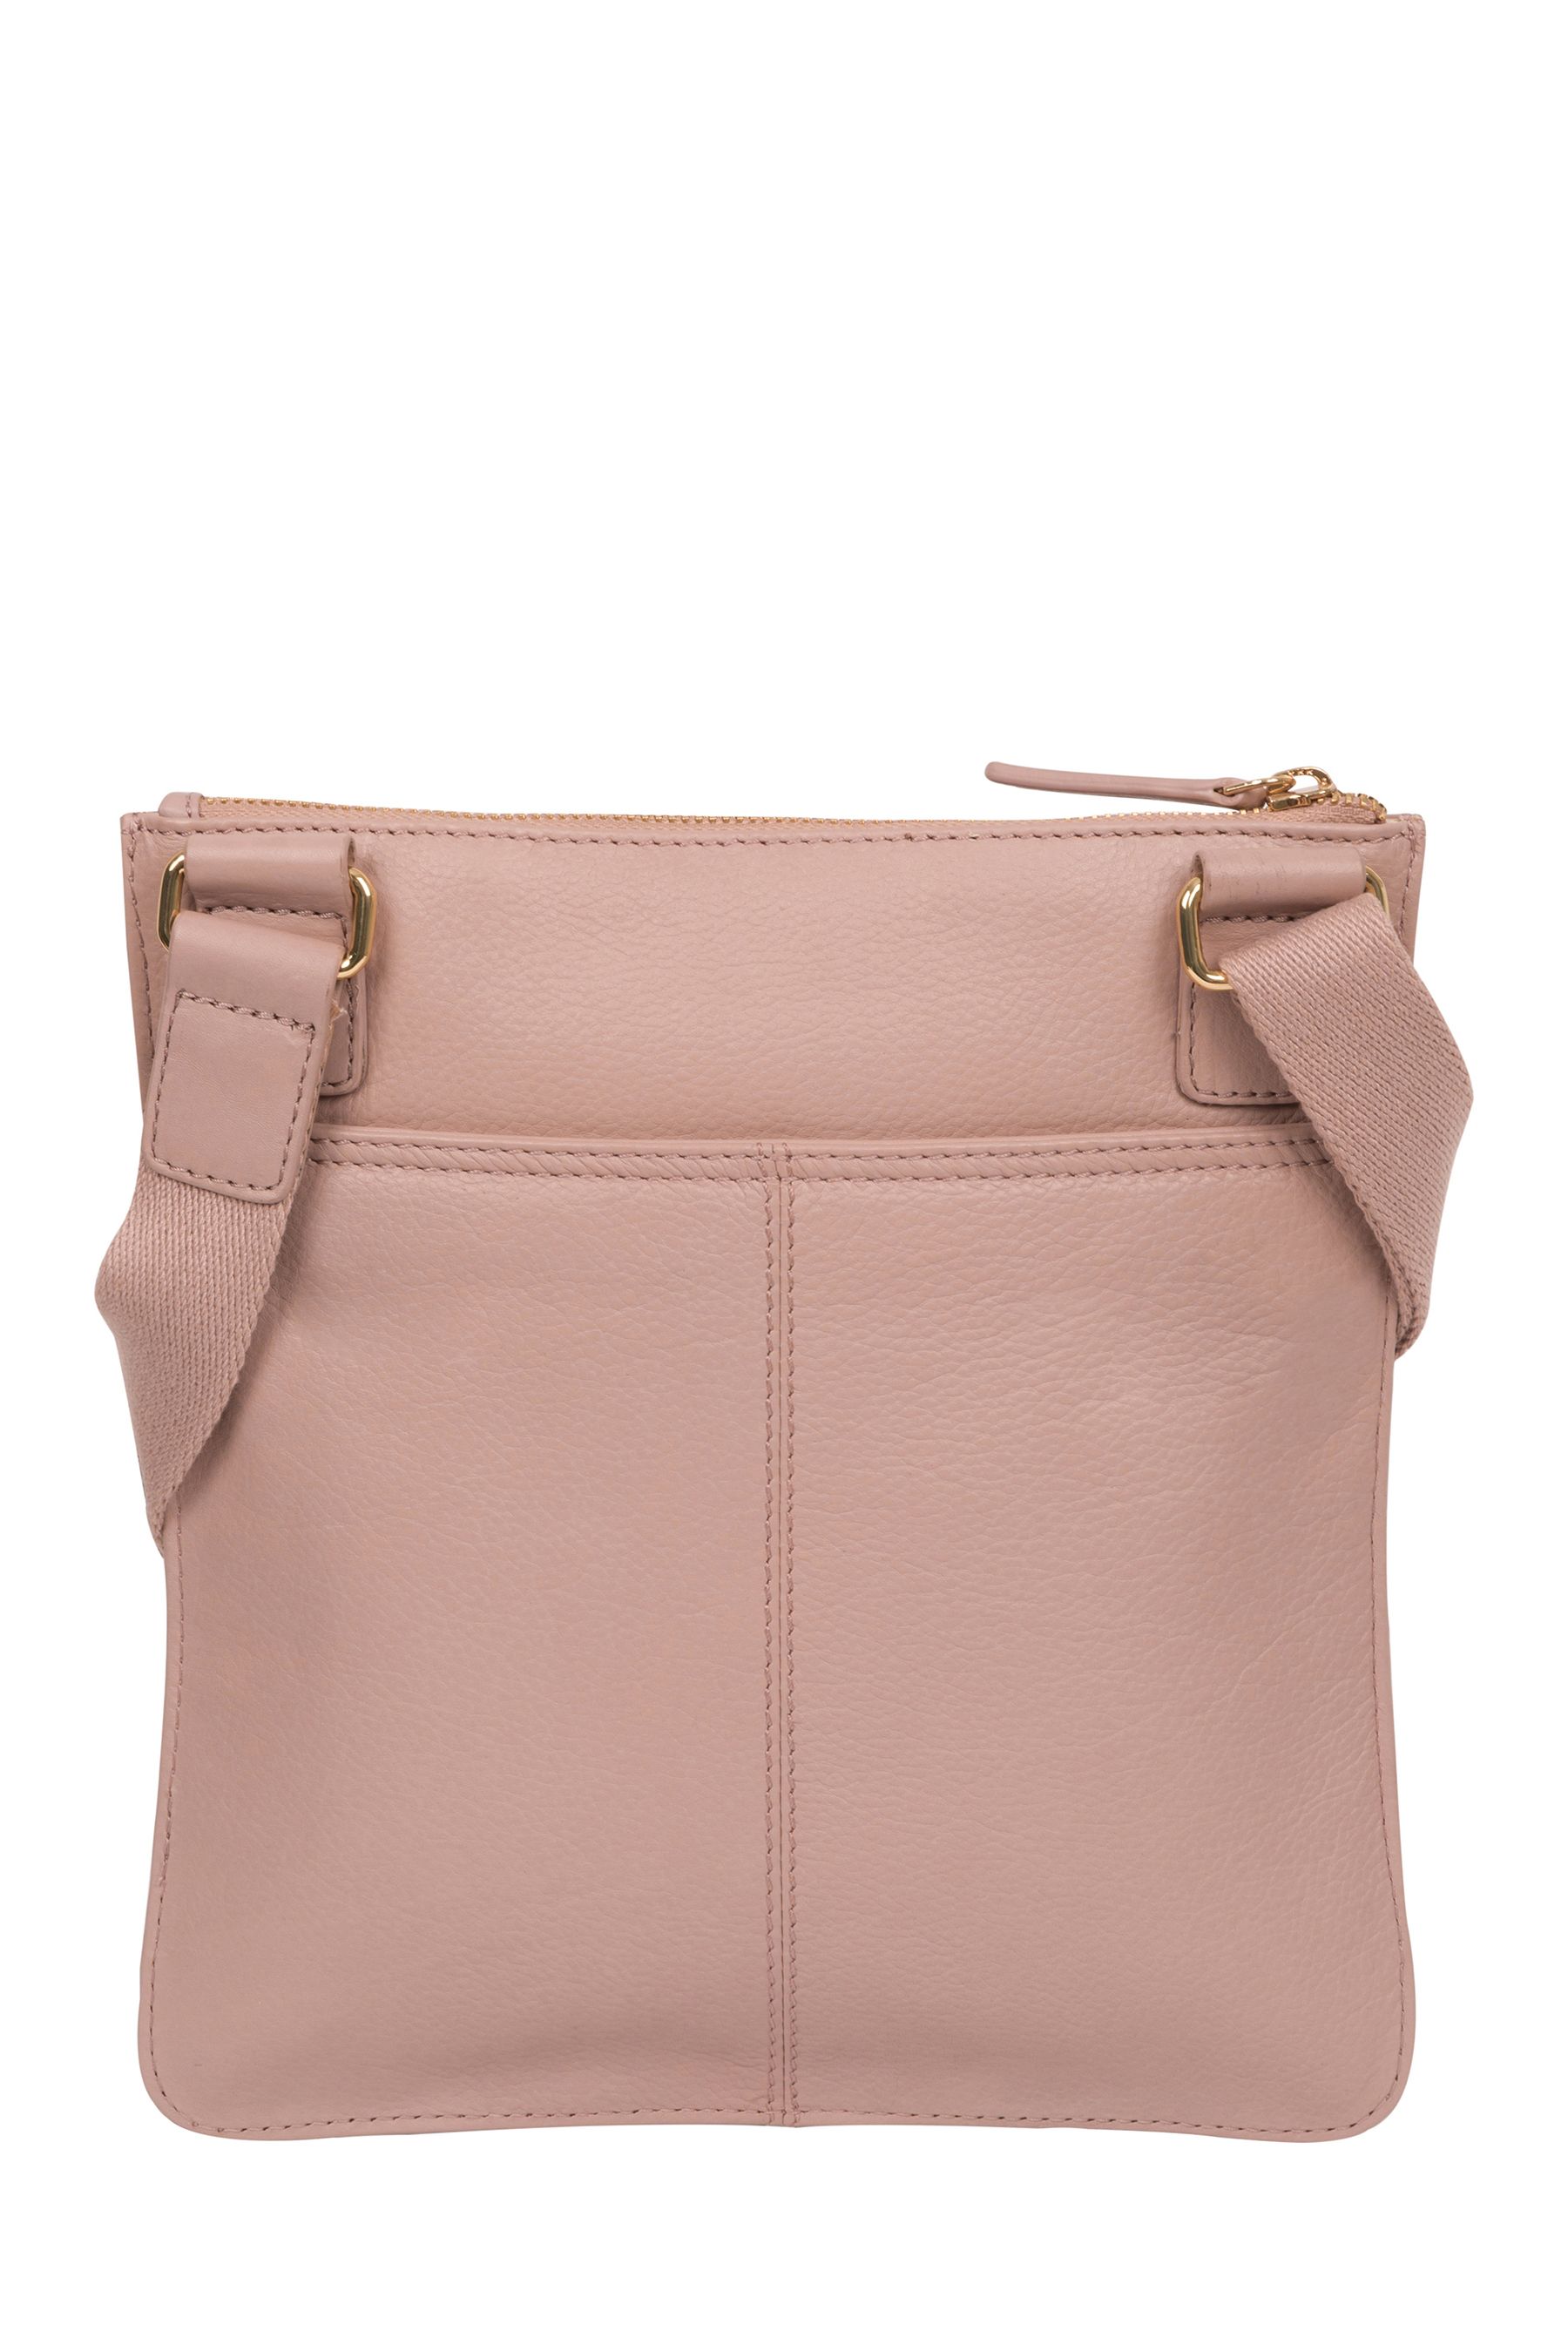 Buy Pure Luxuries London Langley Leather Cross-Body Bag from the Next ...